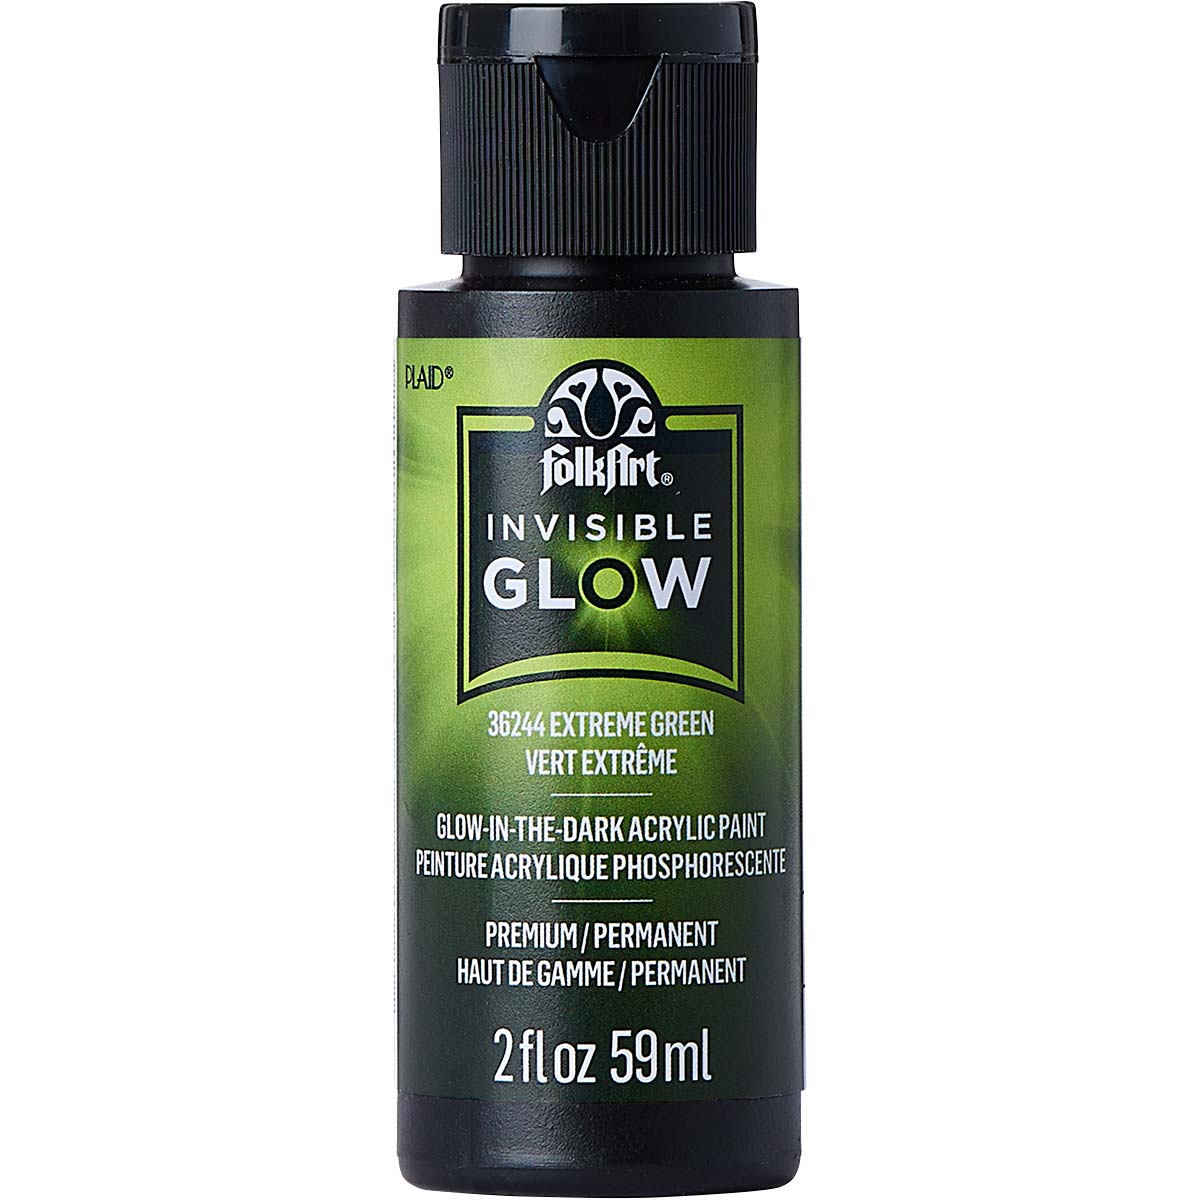 FolkArt ® Invisible Glow™ Acrylic Paint - Extreme Green, 2 oz. - 36244